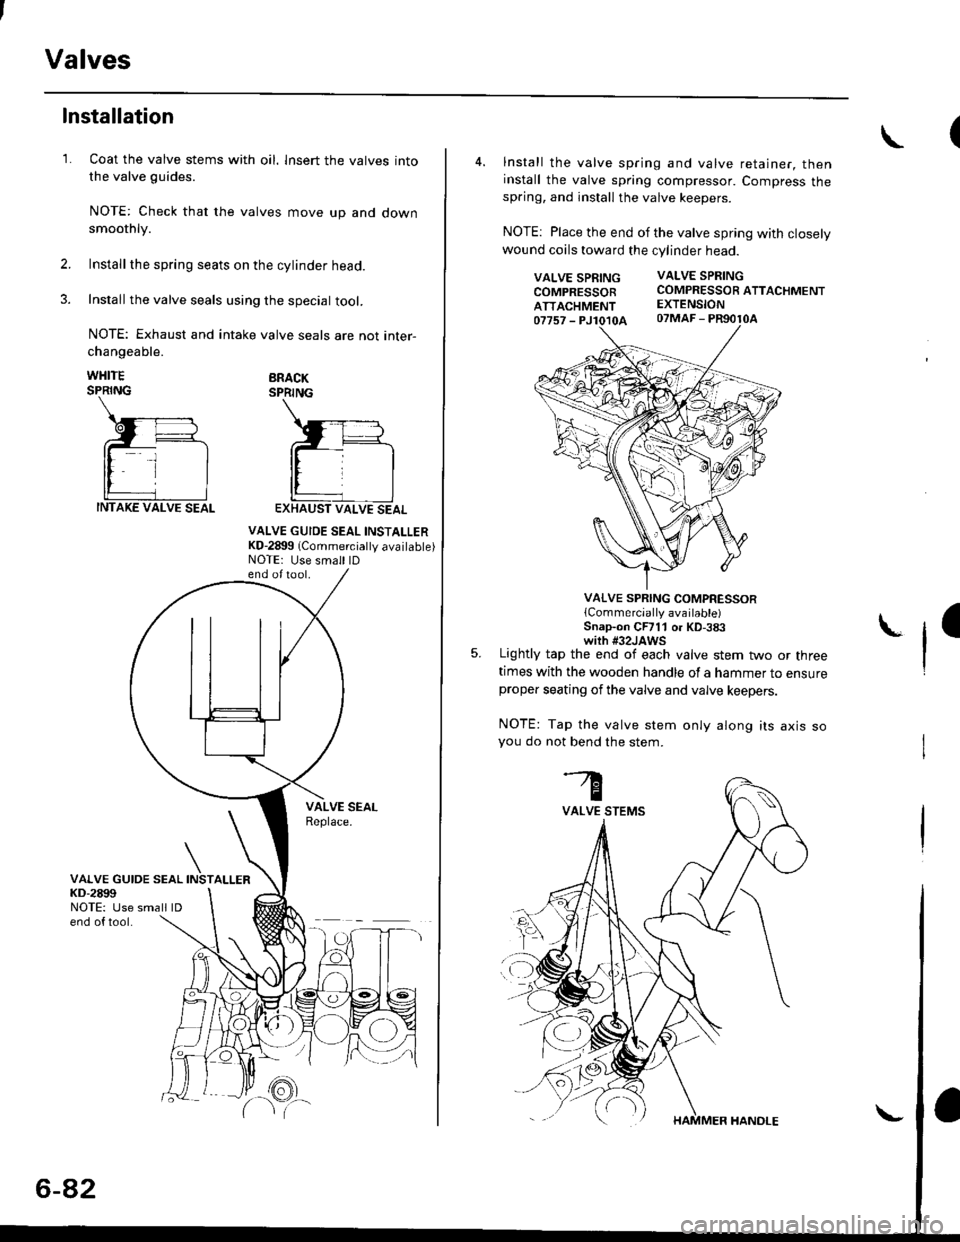 HONDA CIVIC 2000 6.G Workshop Manual Valves
1.
Installation
Coat the valve stems with oil. lnsert the valves into
the valve guides.
NOTE: Check that the valves move up and downsmoothly.
Installthe spring seats on the cylinder head.
Insta